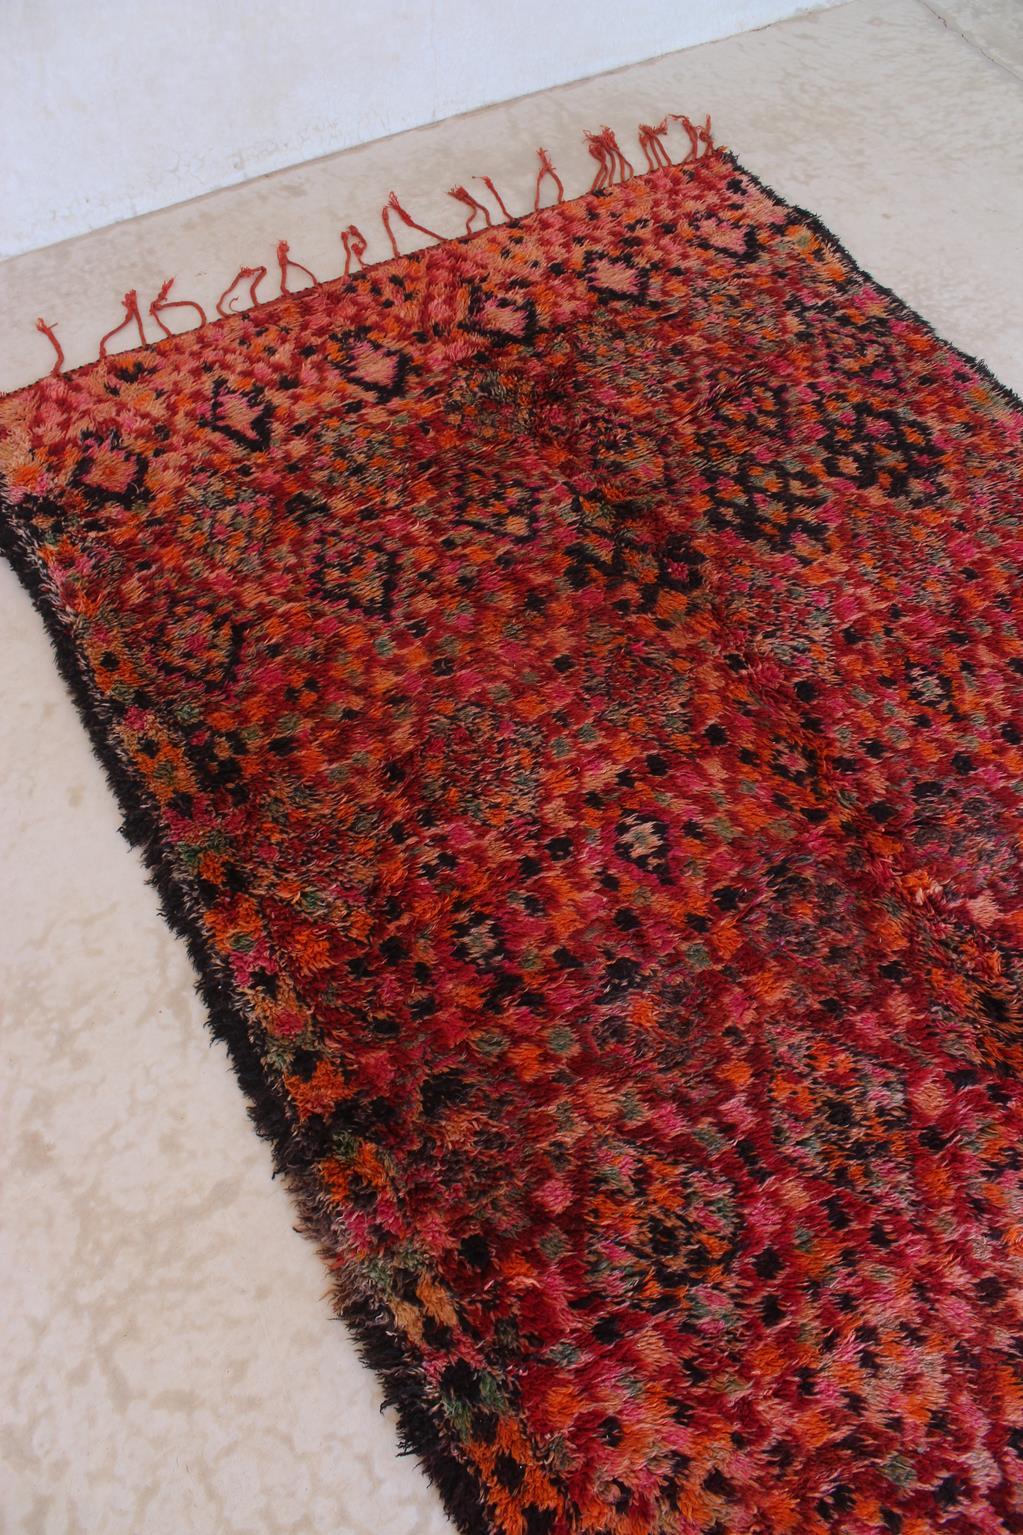 Wool Vintage Moroccan Beni Mguild rug - Red - 6.5x14.3feet / 200x437cm For Sale